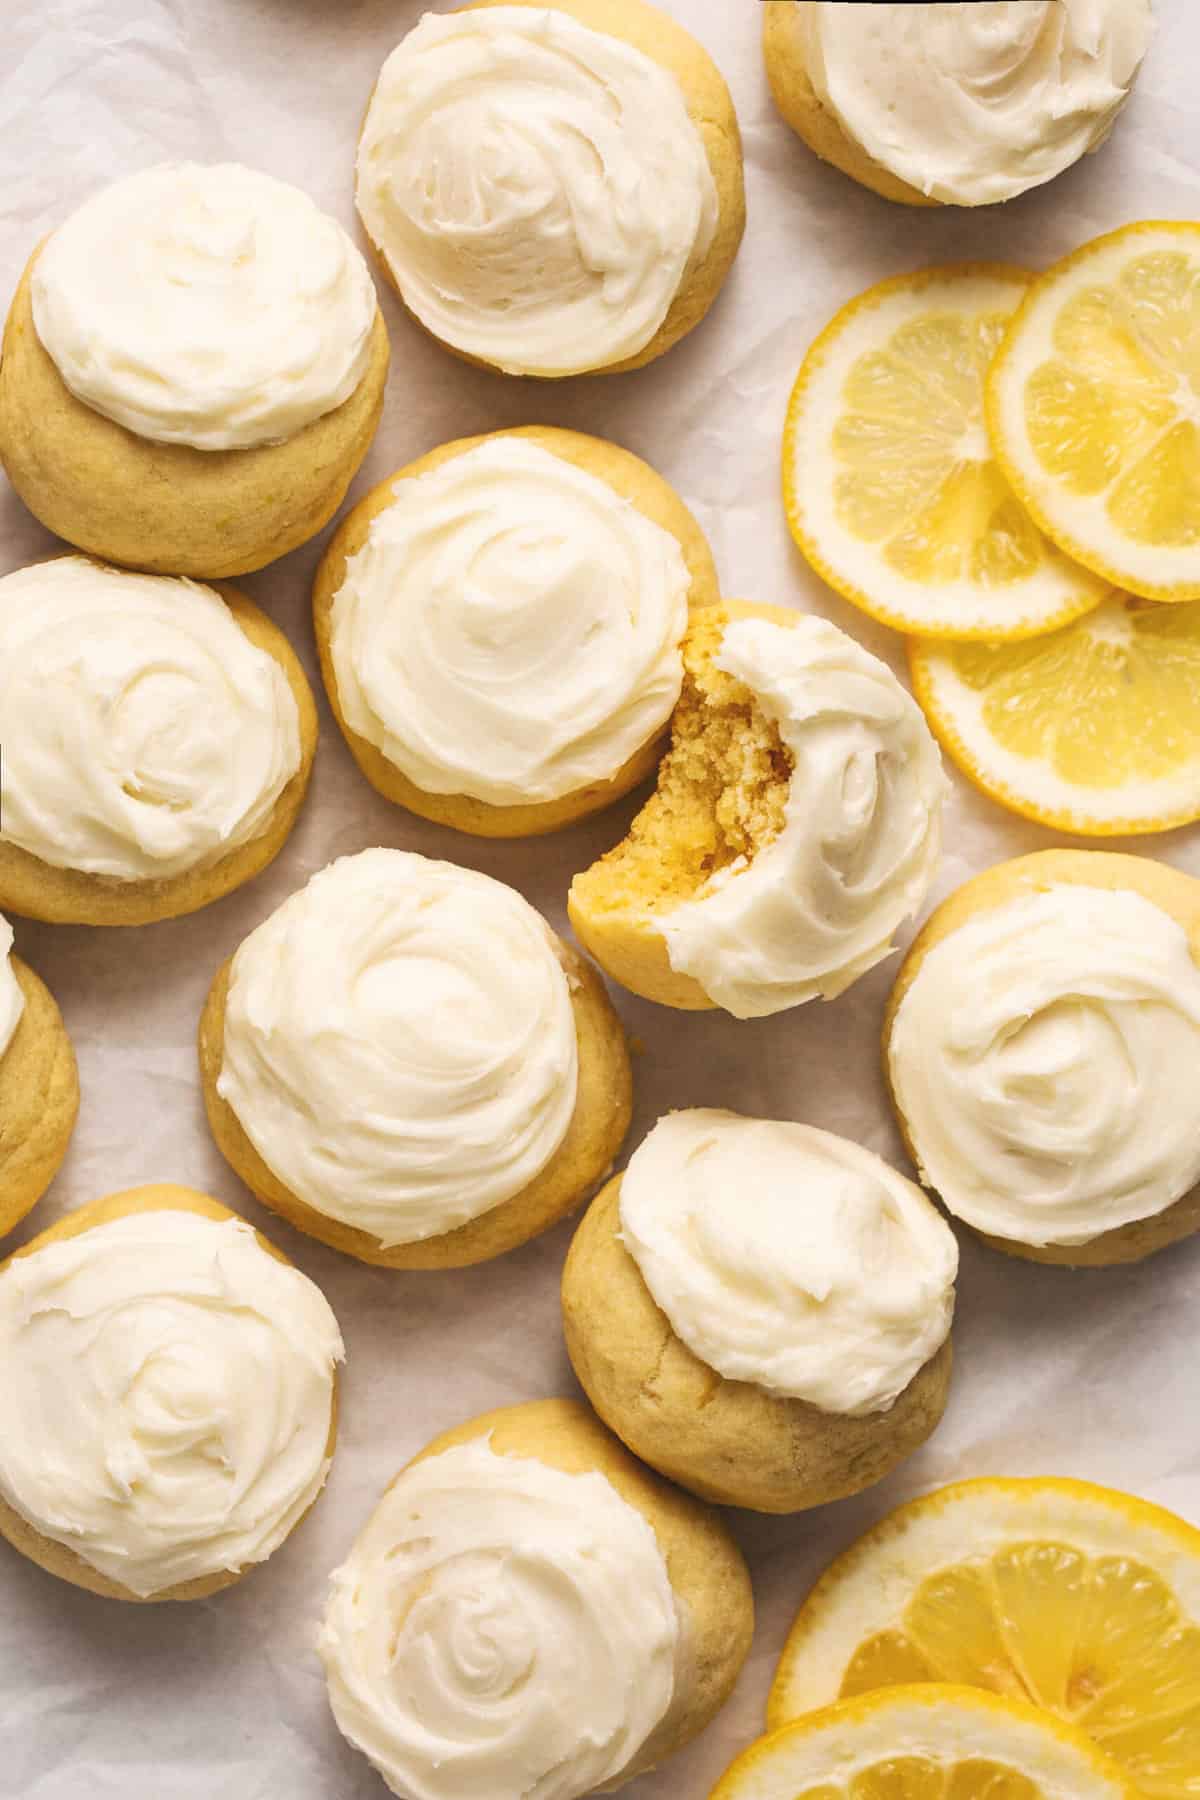 lemon cookies with frosting and lemon slices